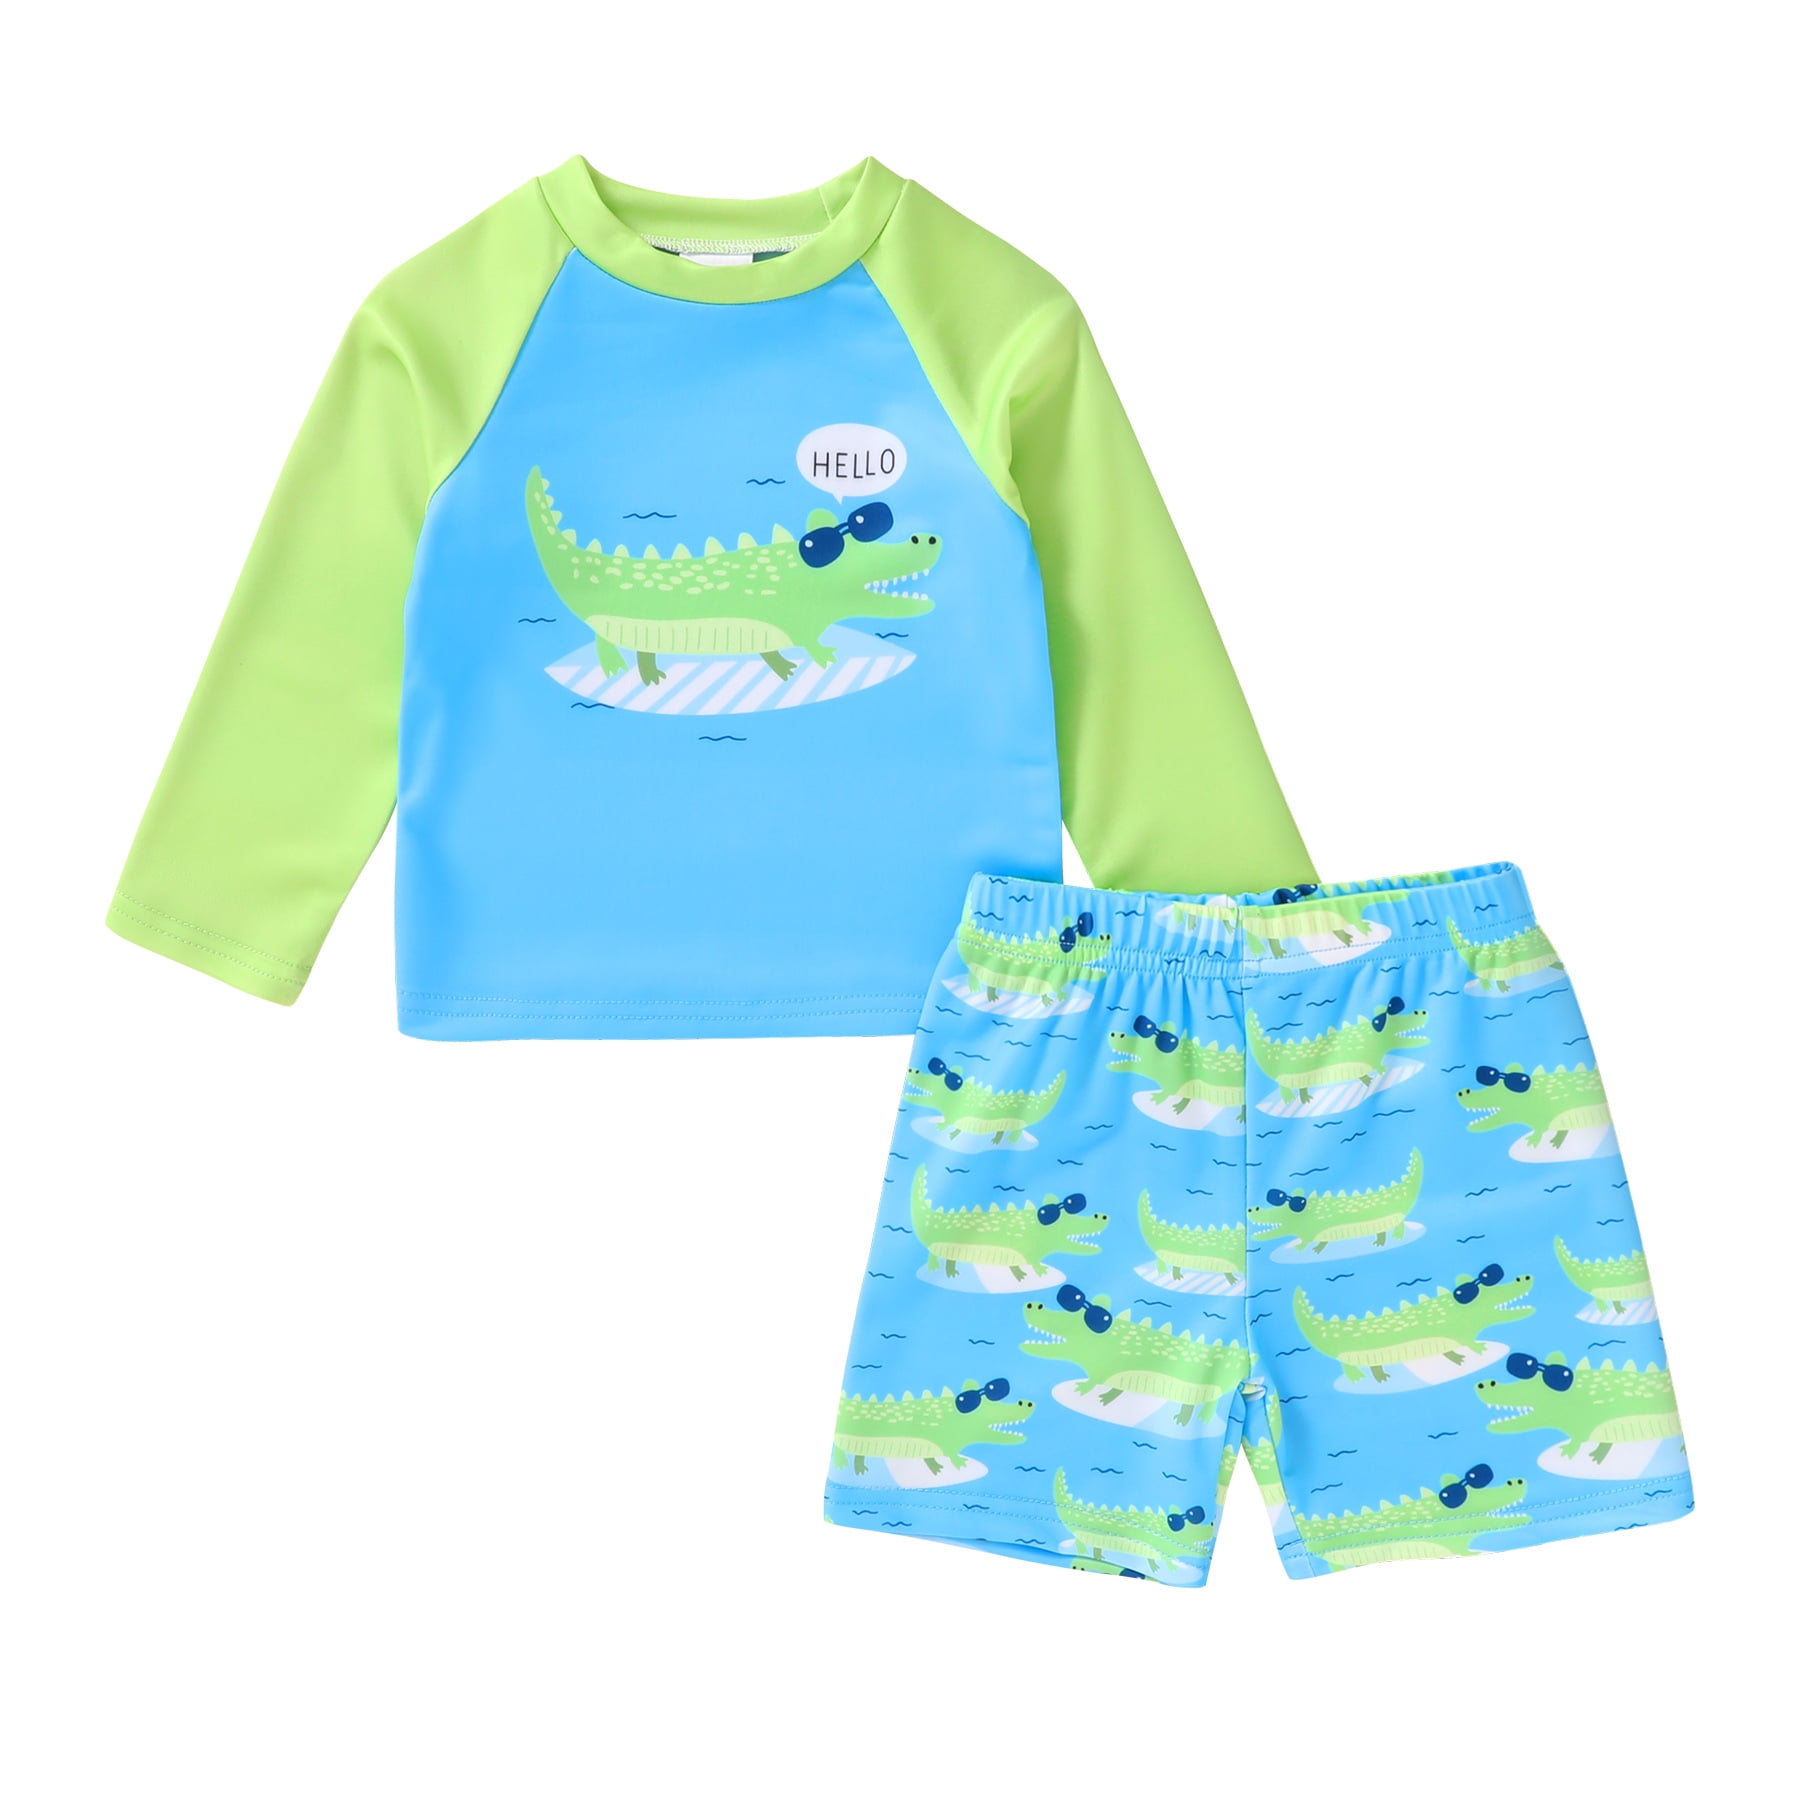 Younger Tree Toddler Baby Boys Swimsuits Trunk Rashguard Long Sleeve Top Shorts Two Pieces Bathing Suit Swimwear Outfit for 5-6T